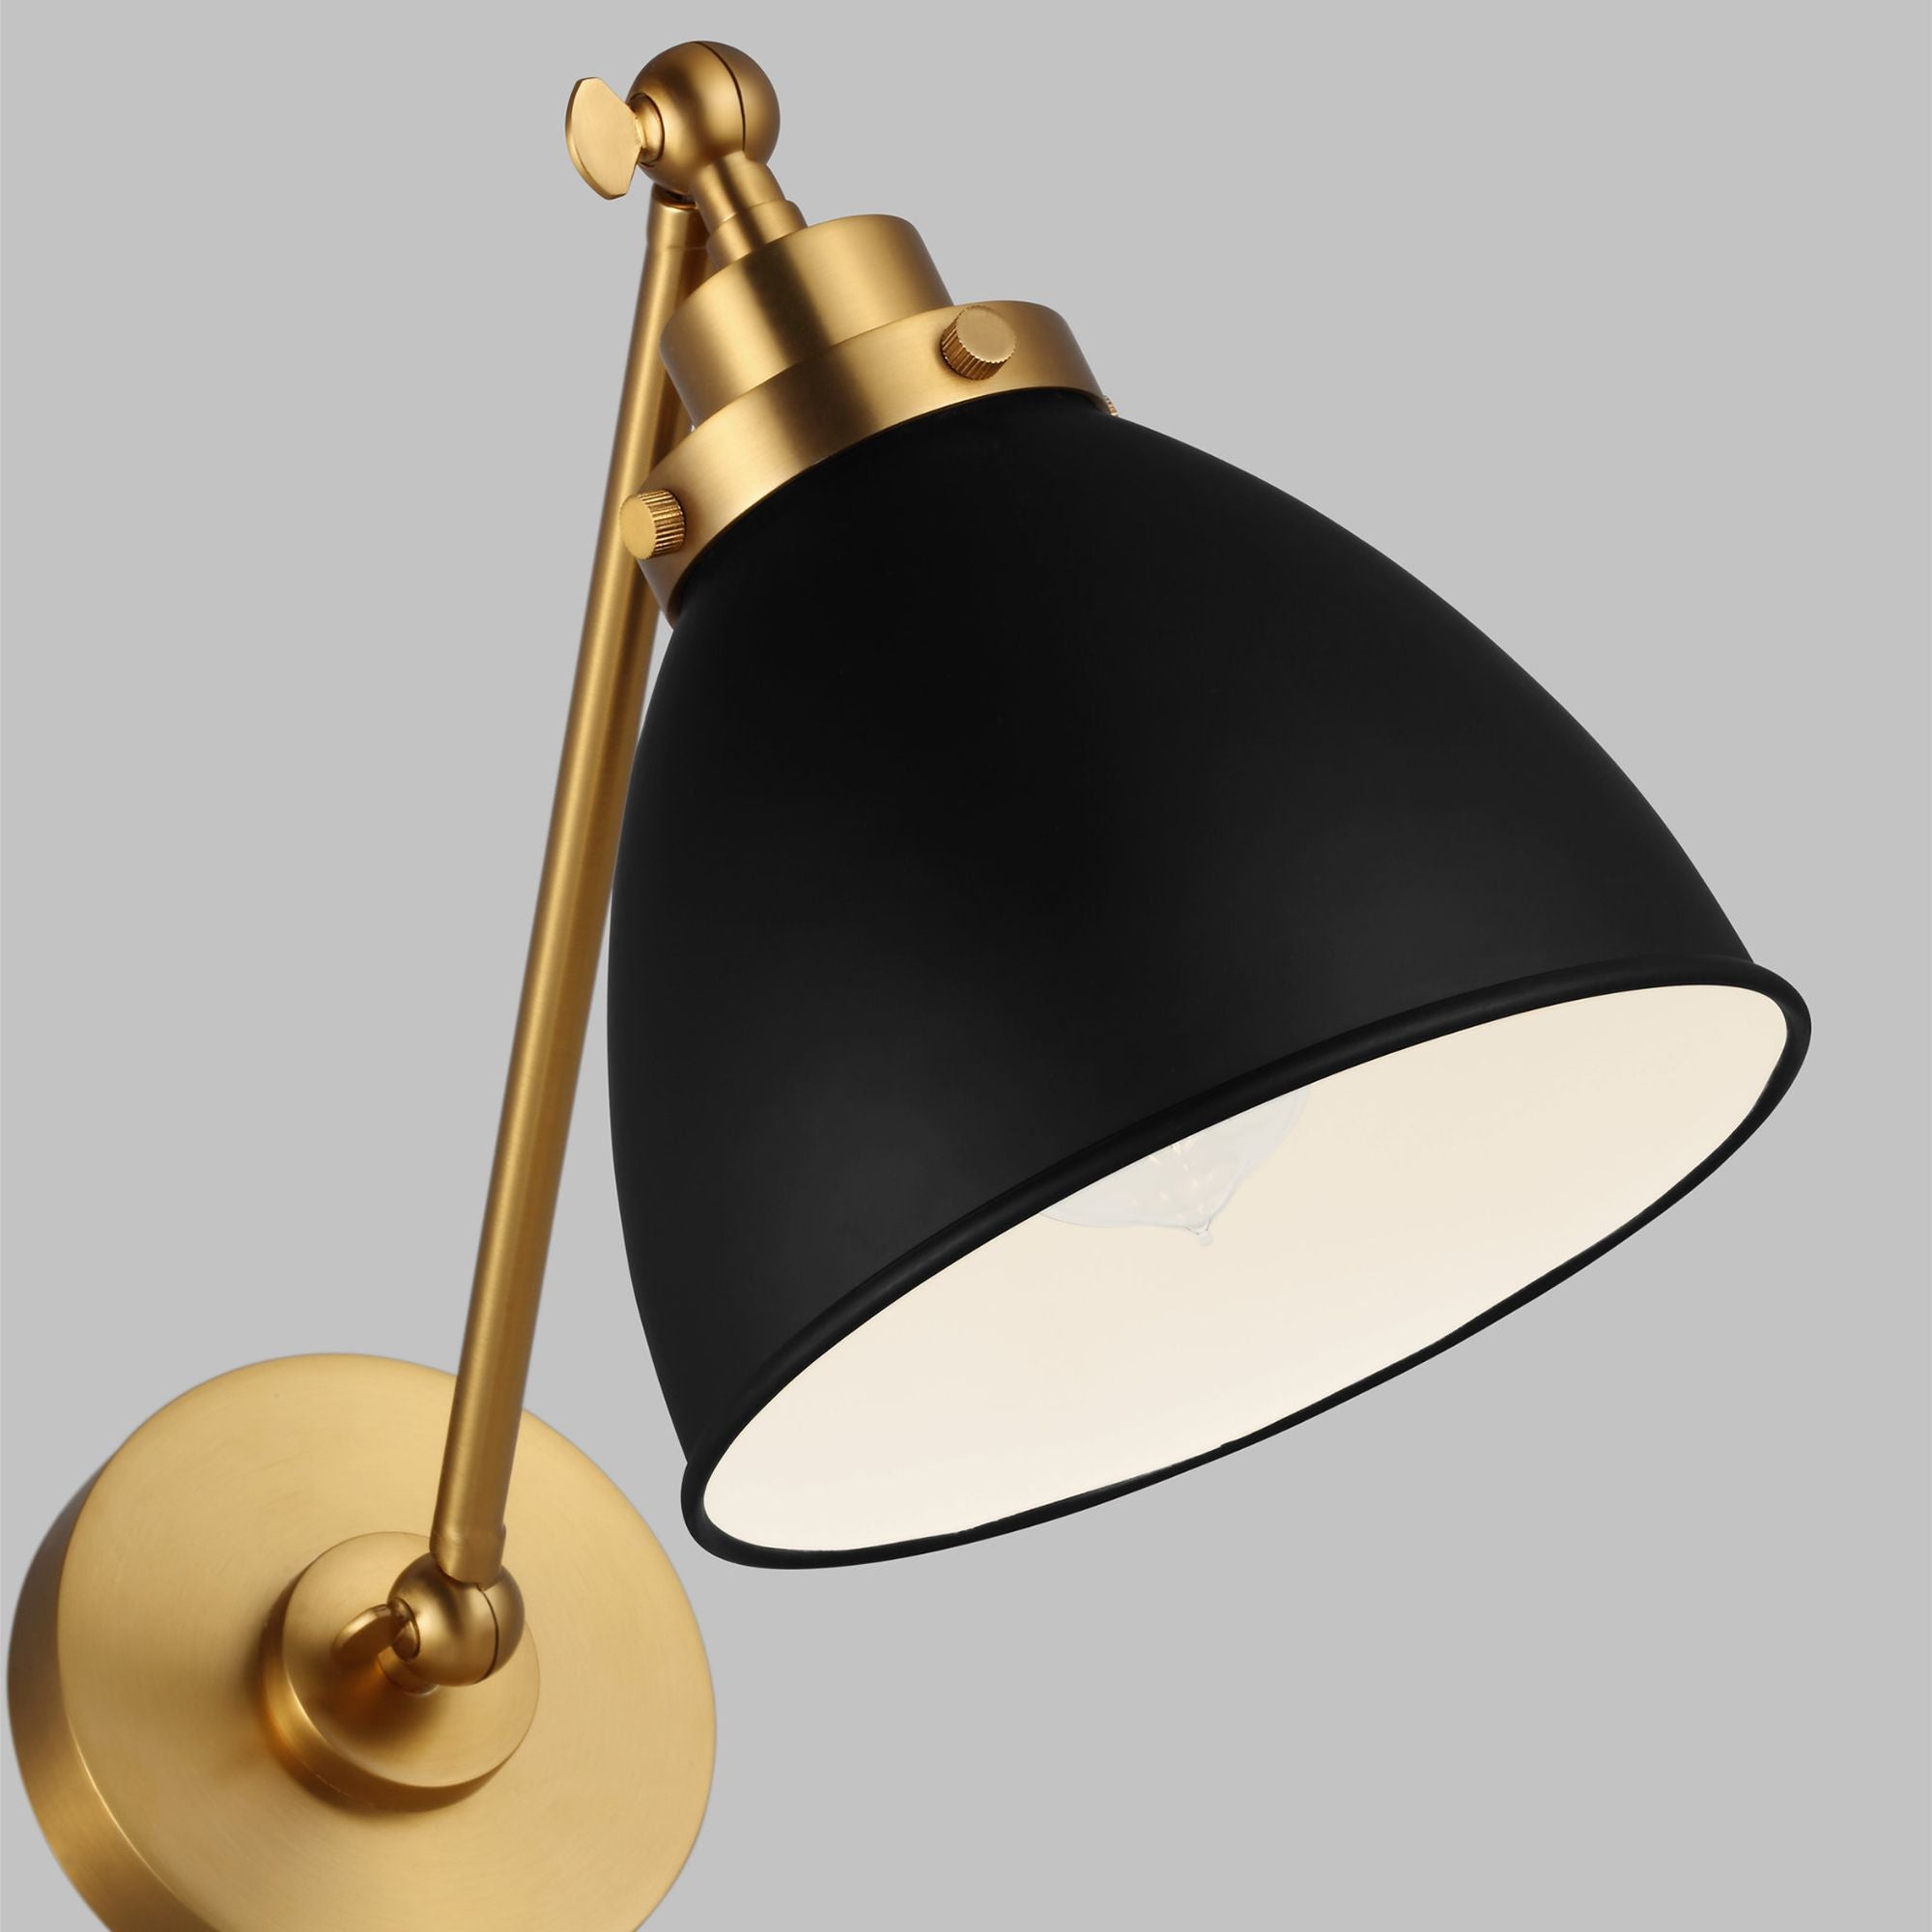 Chapman & Myers Wellfleet Single Arm Dome Task Sconce in Midnight Black and Burnished Brass